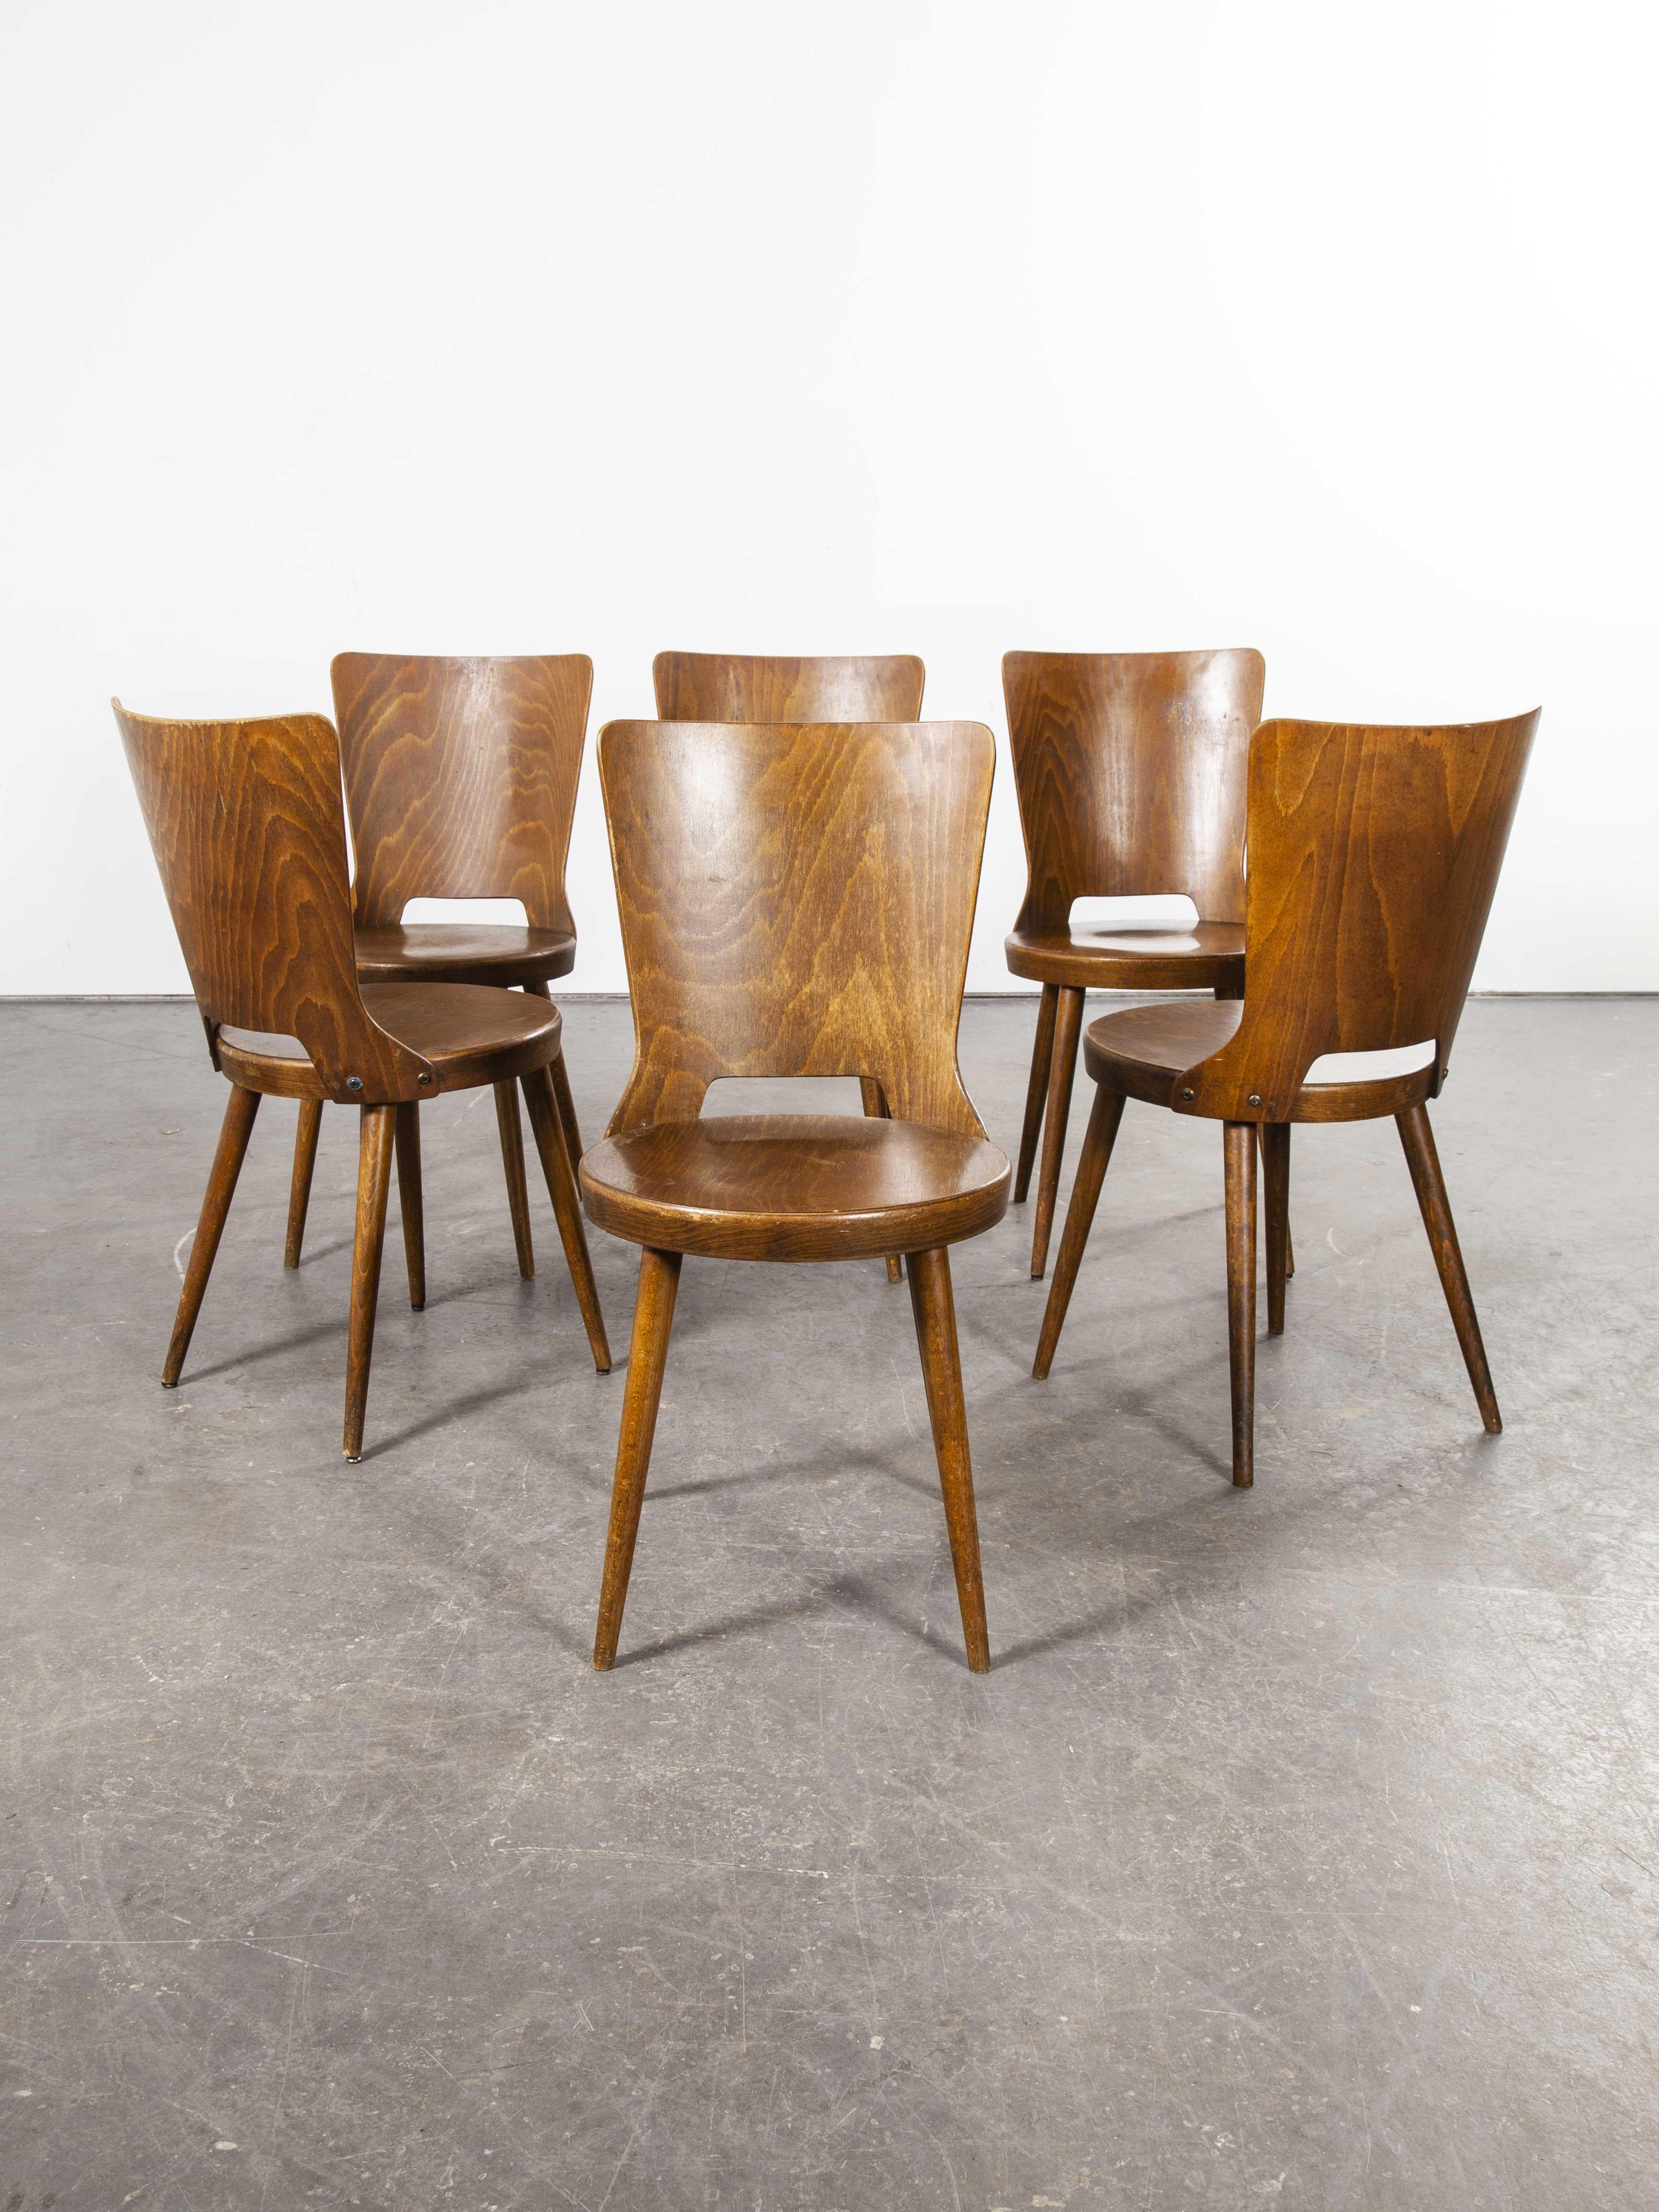 1960’s French Baumann bentwood dove dining chair – set of six
1960’s French Baumann bentwood dove dining chair – set of six. The Dove chairs is one of Baumann’s most beautiful designs. Baumann is a slightly off the radar French producer just